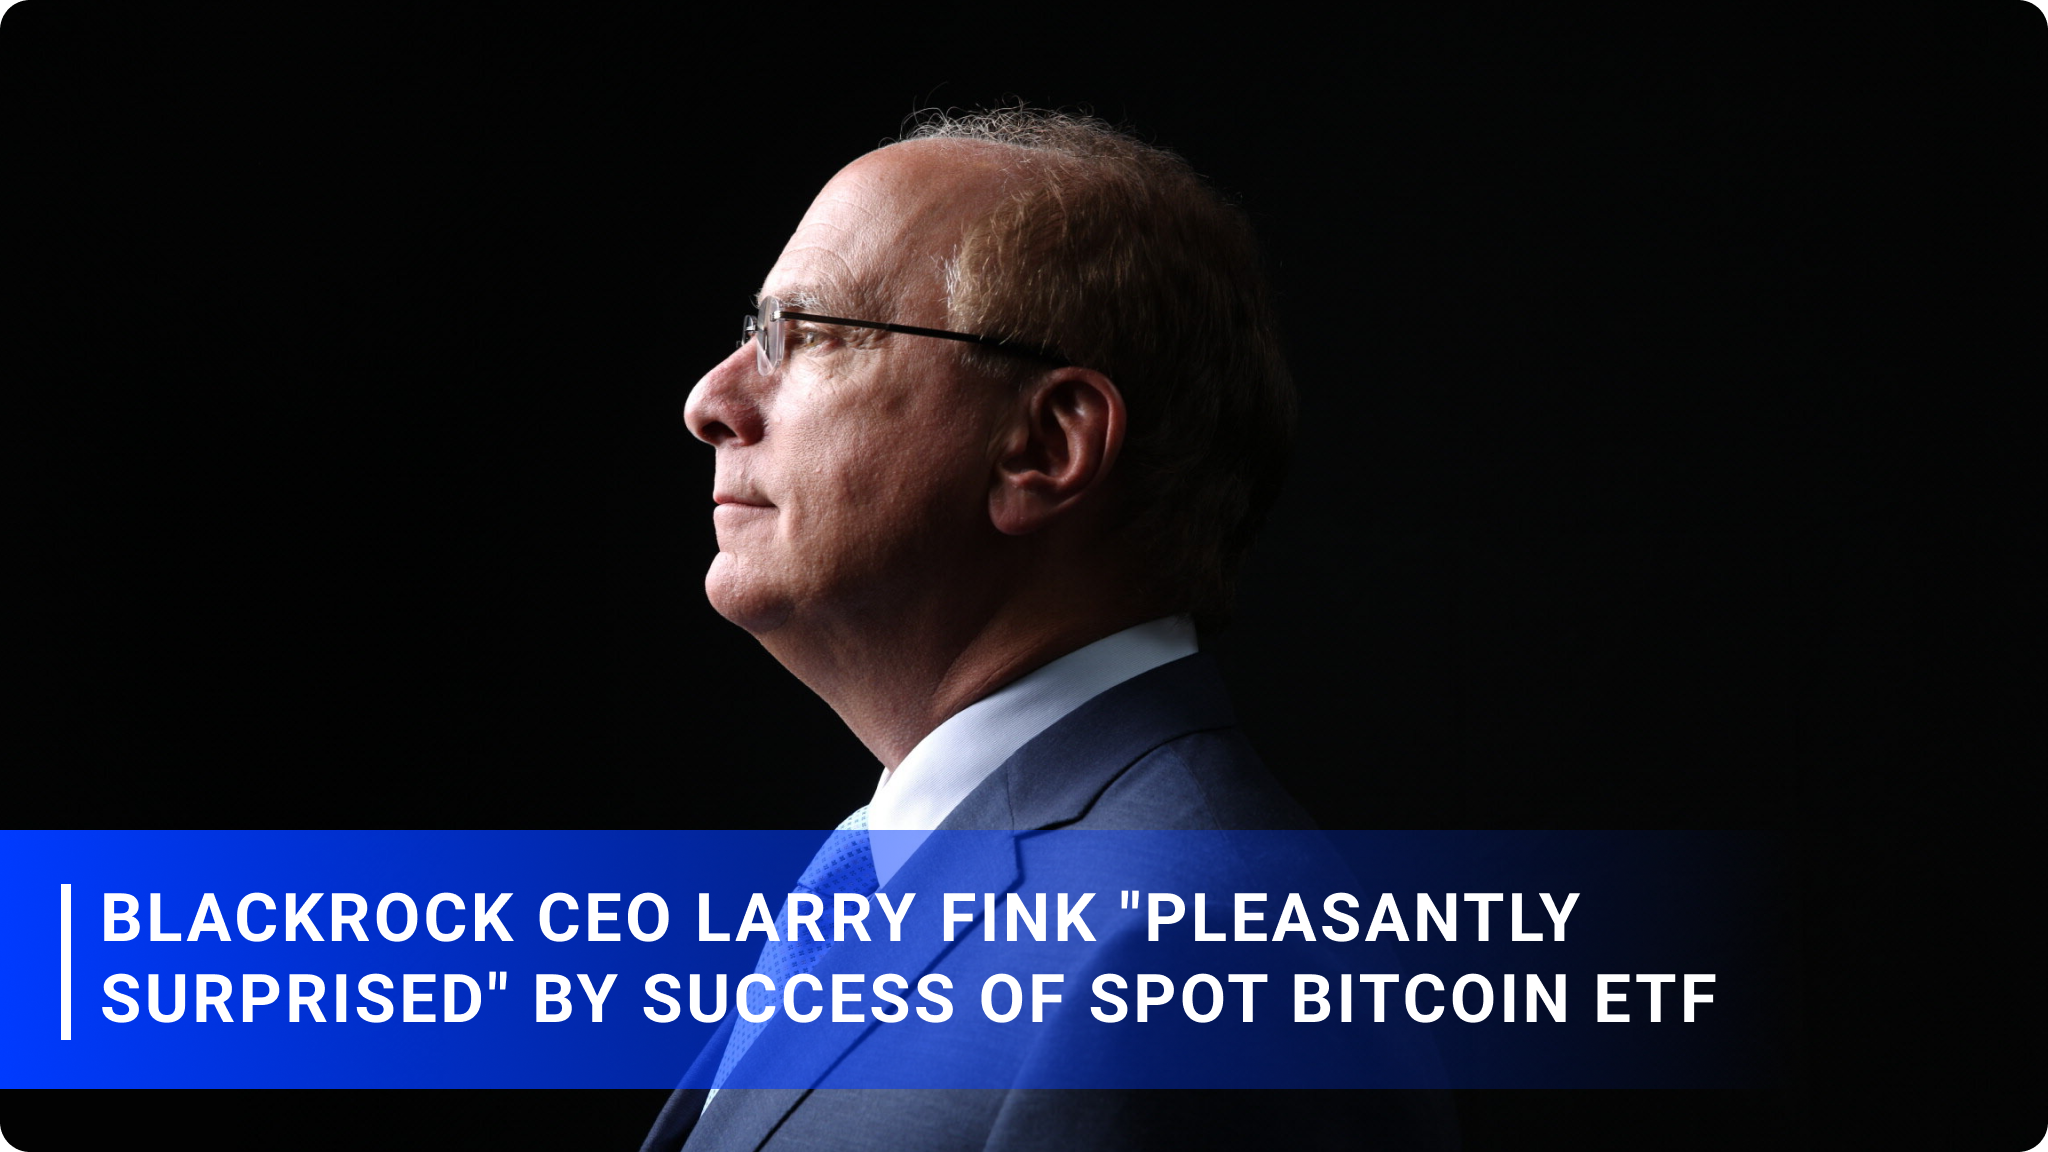 BlackRock CEO Larry Fink "Pleasantly Surprised" by Success of Spot Bitcoin ETF